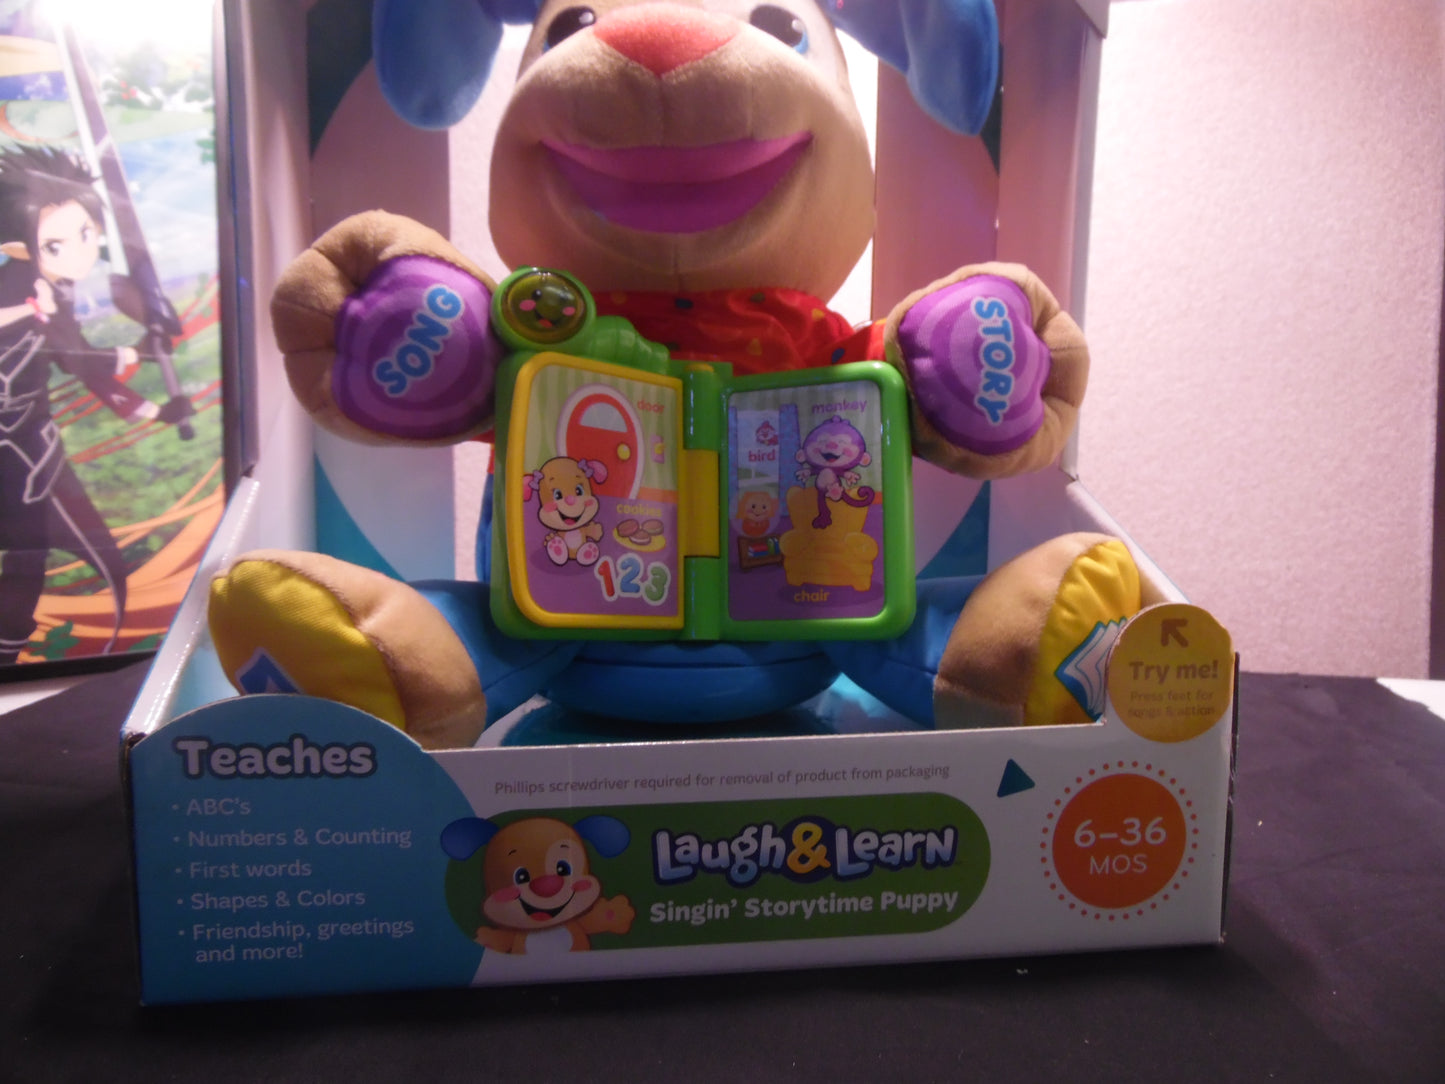 Storytime Puppy Fisher-Price Laugh & Learn Singin'